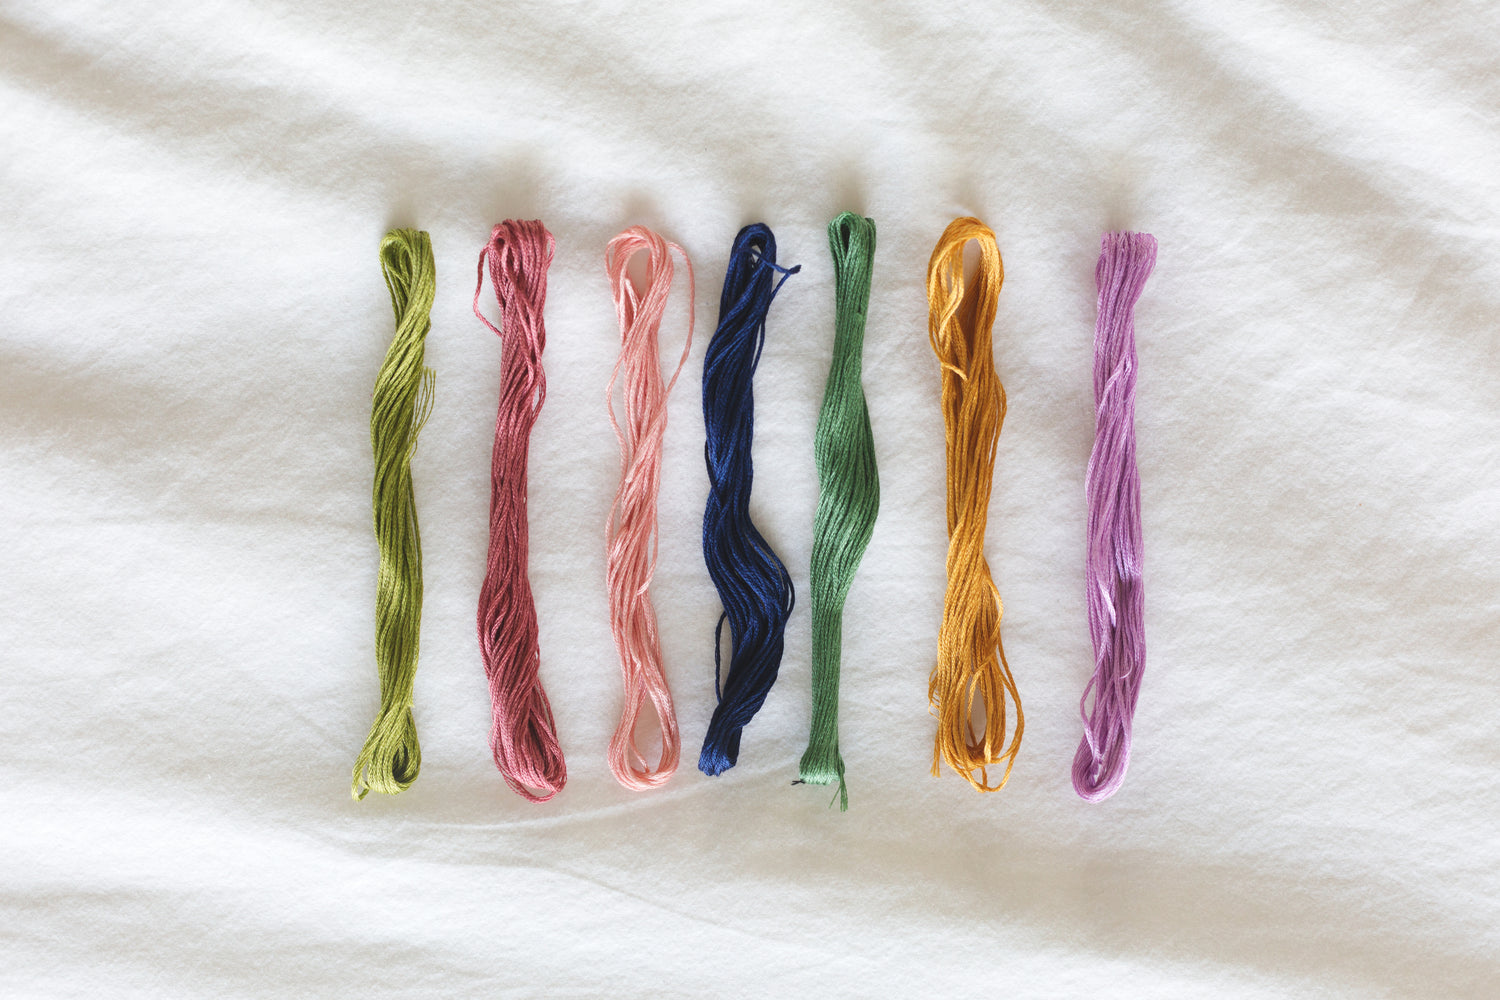 Image of embroidery thread lined up